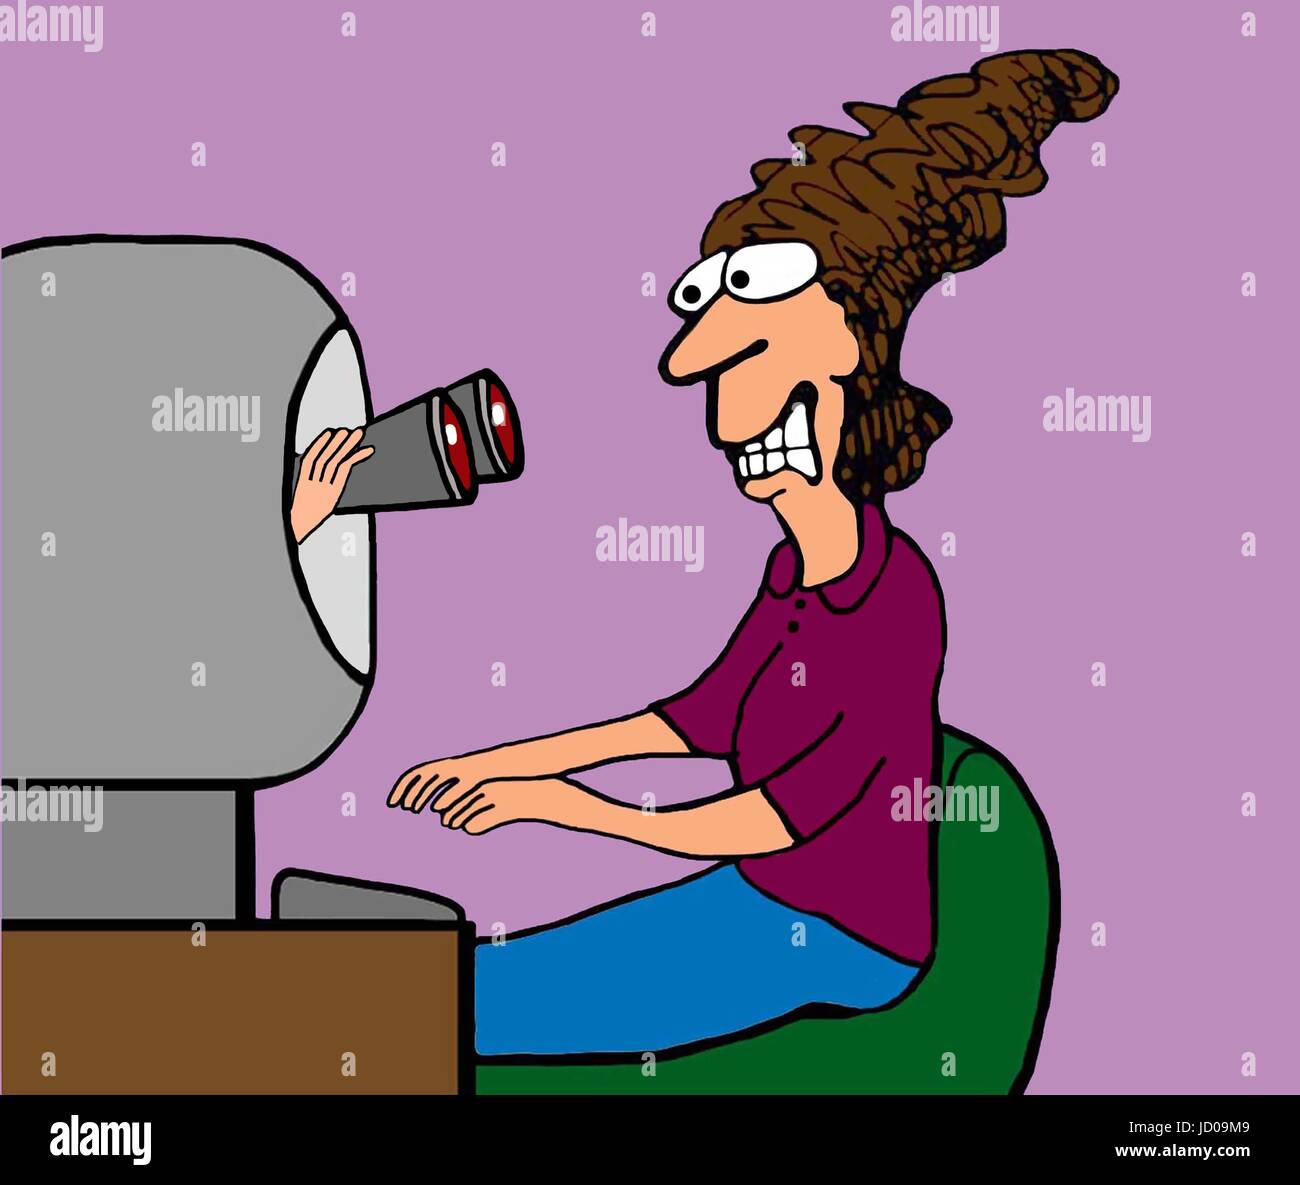 Business cartoon illustration of a businesswoman stressed at the company spying on her computer usage. Stock Photo